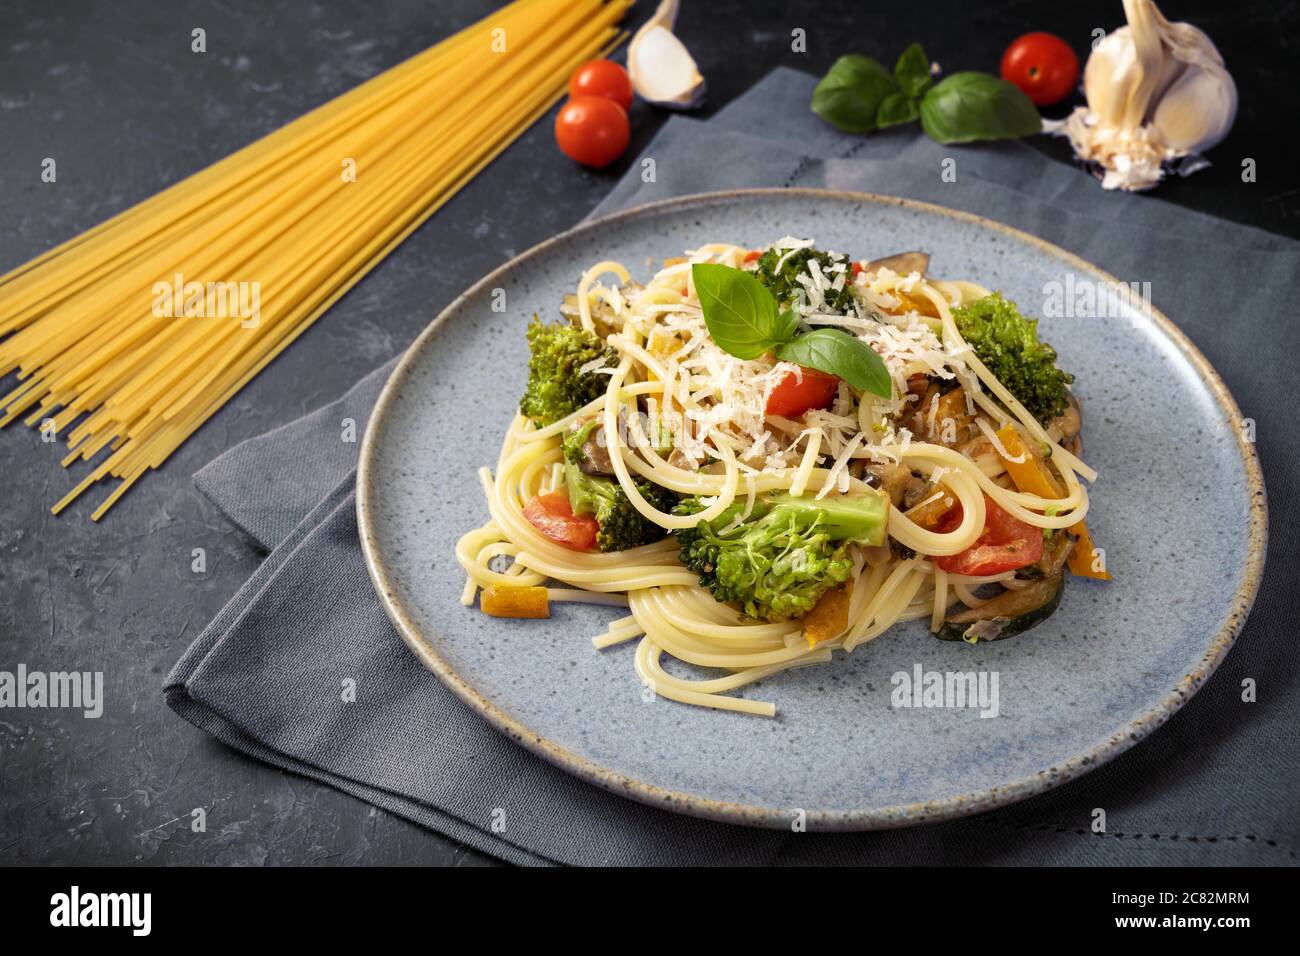 Spaghetti pasta with vegetables and parmesan, vegetarian meal and ingredients on a grey-blue plate and a dark rustic background, selected focus, narro Stock Photo